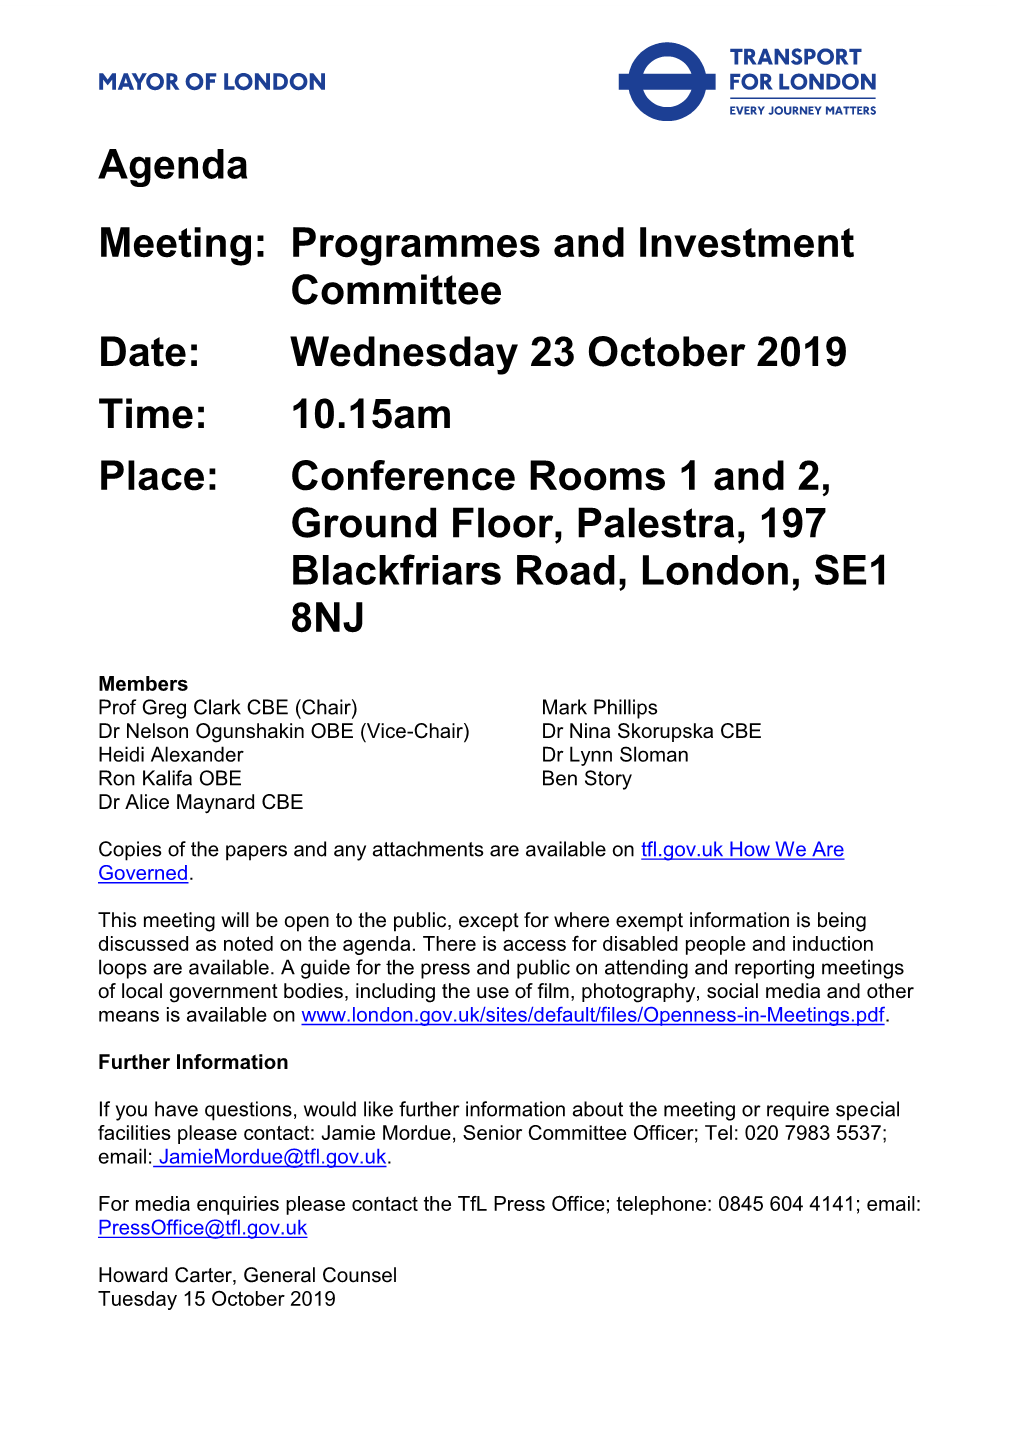 Programmes and Investment Committee, 23/10/2019 10:15